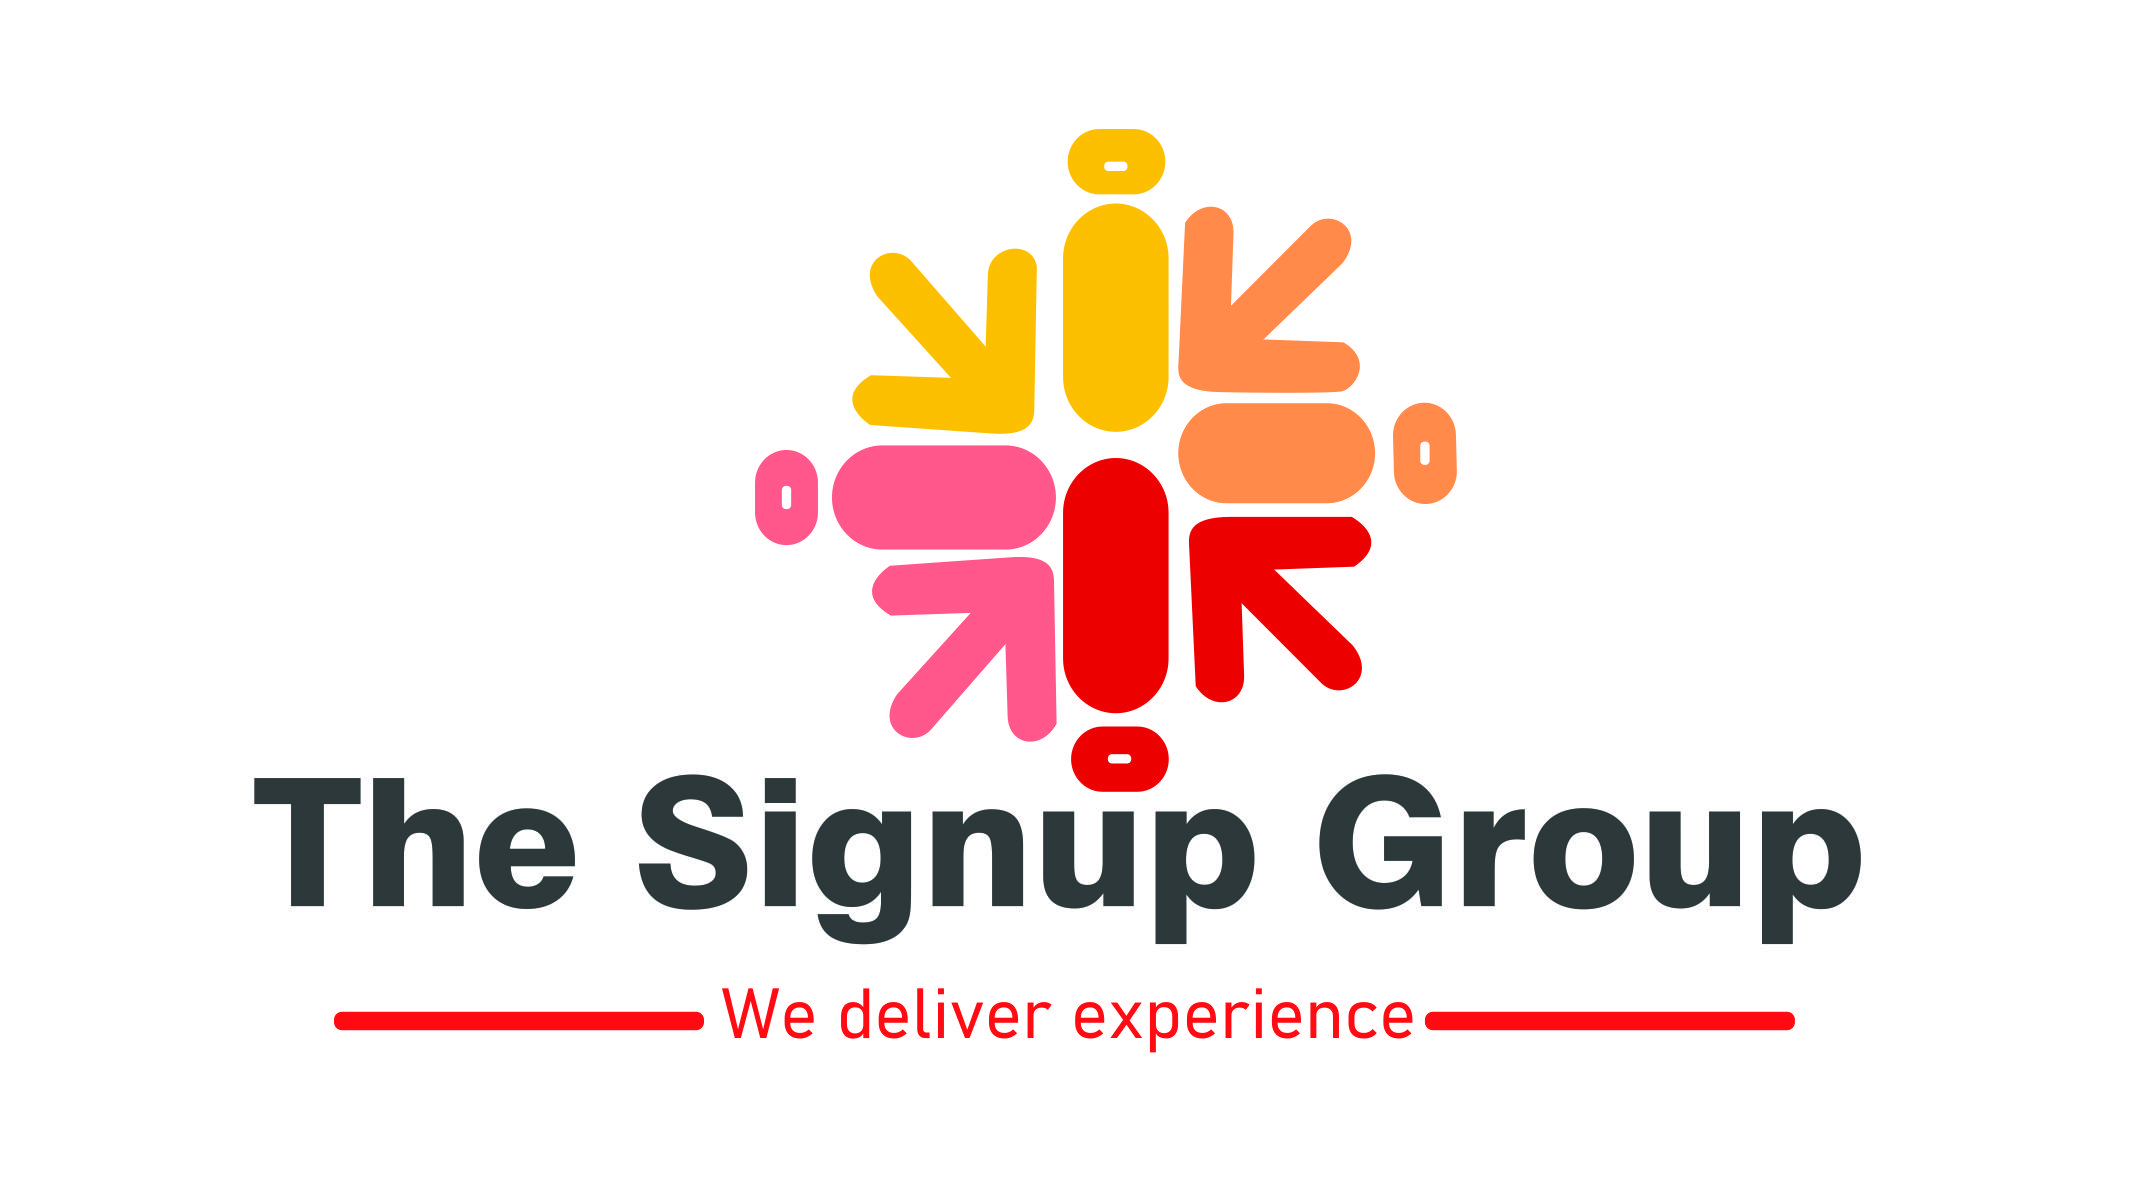 The Signup Group